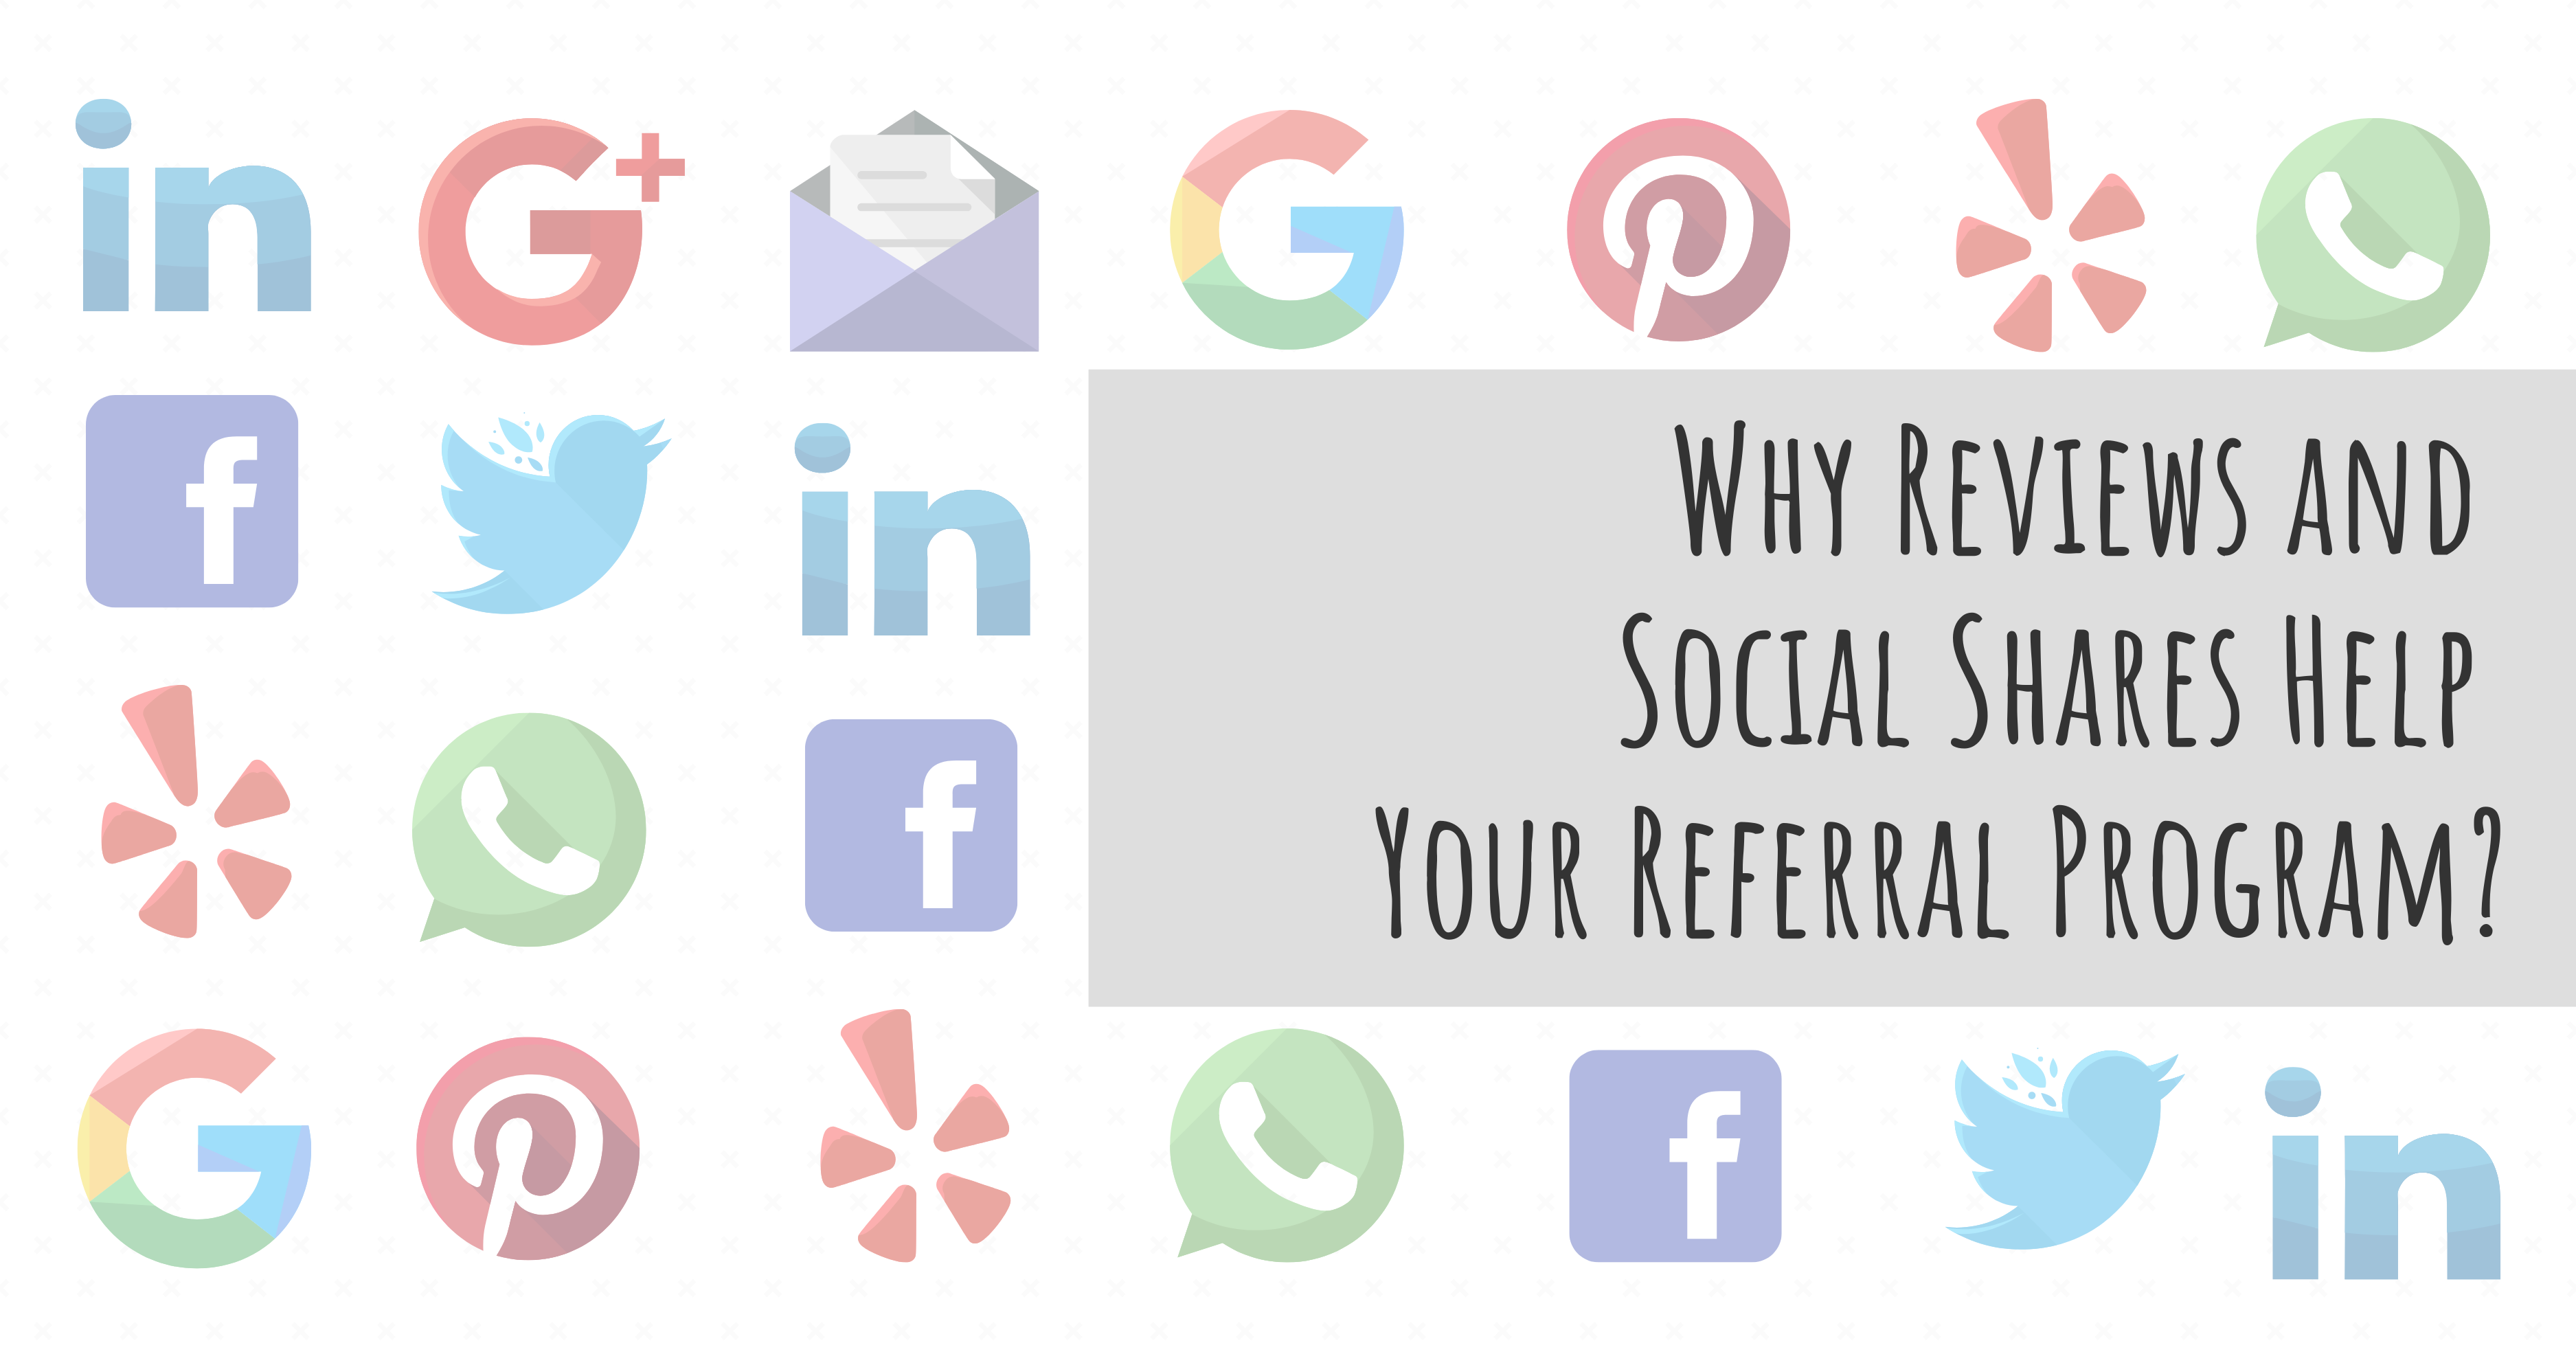 Reviews and Social Shares Help Your Referral Program_Lg